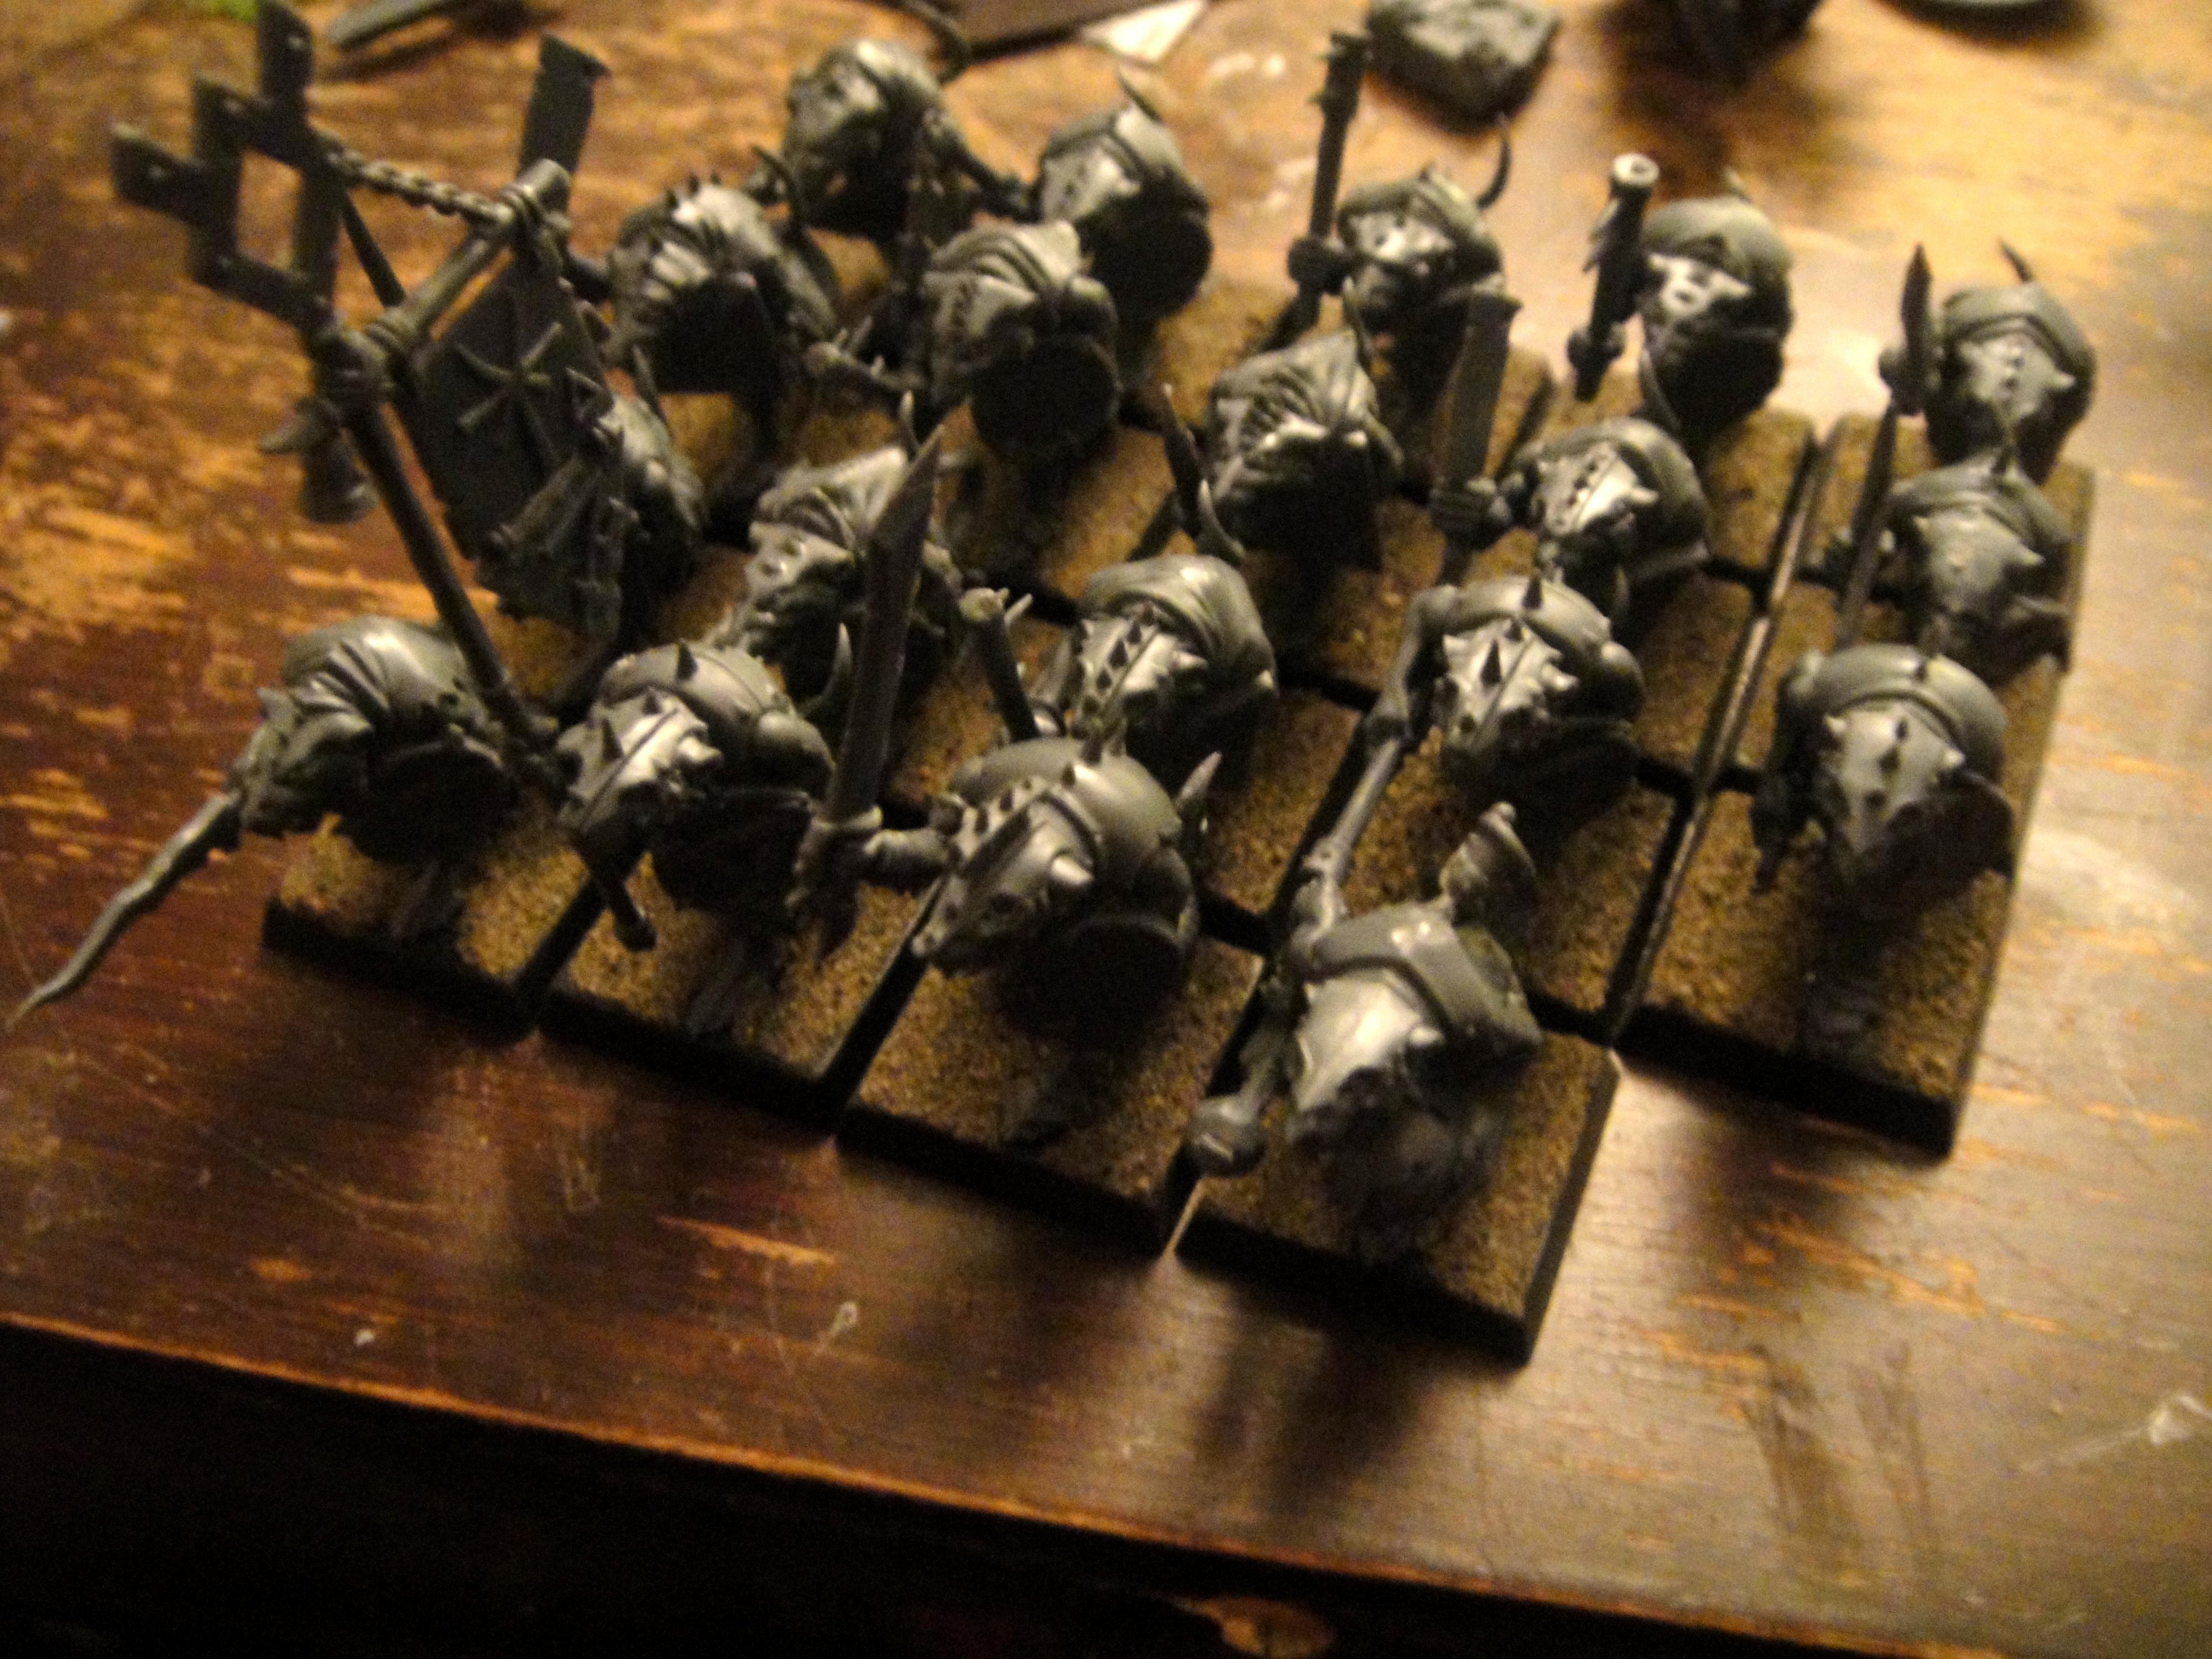 Clanrats, Work In Progress